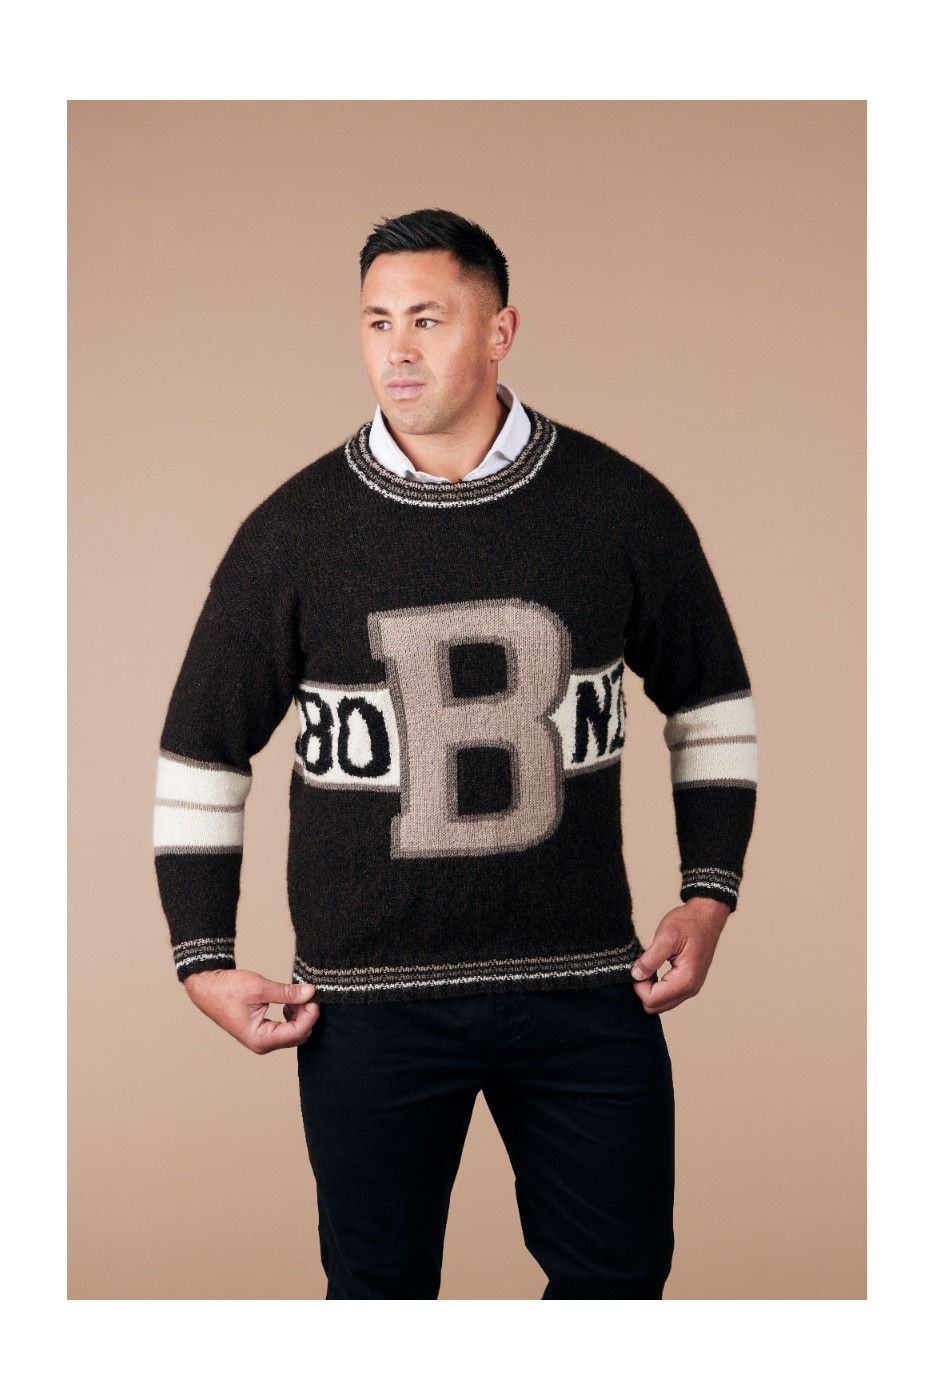 The Best Leather and Knit Wear of New Zealand BONZ Sweater (Hand